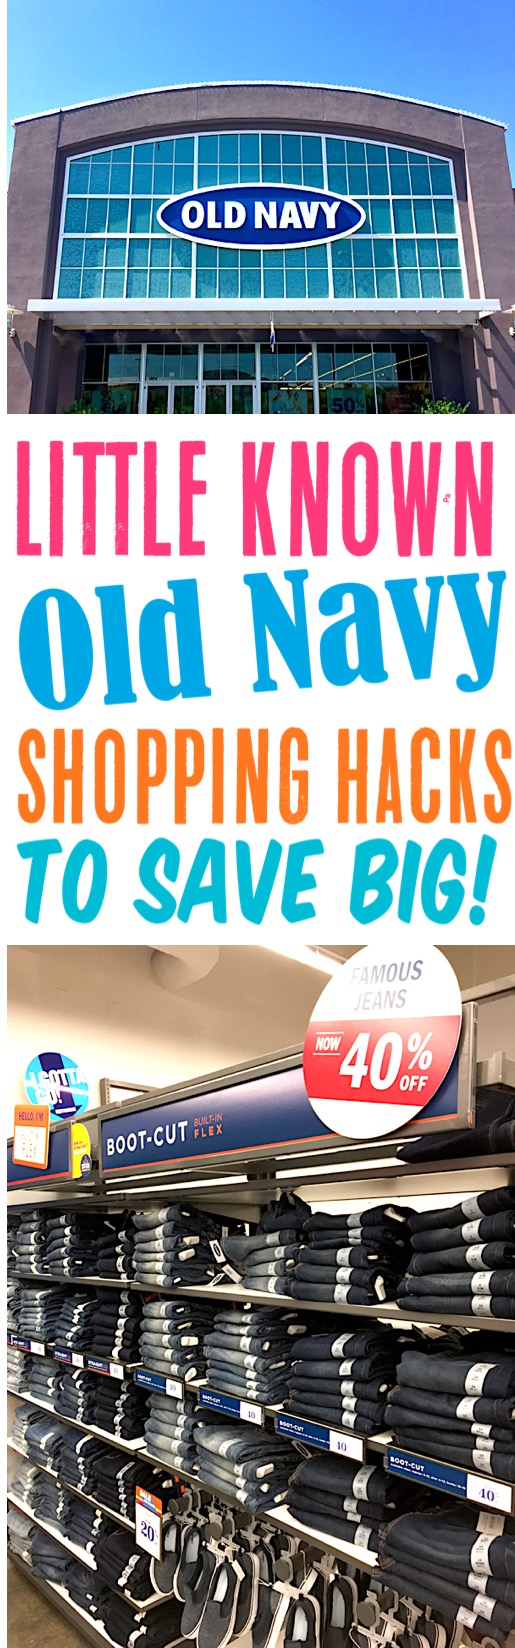 Old Navy Outfits and Shopping Hacks to Save More Money